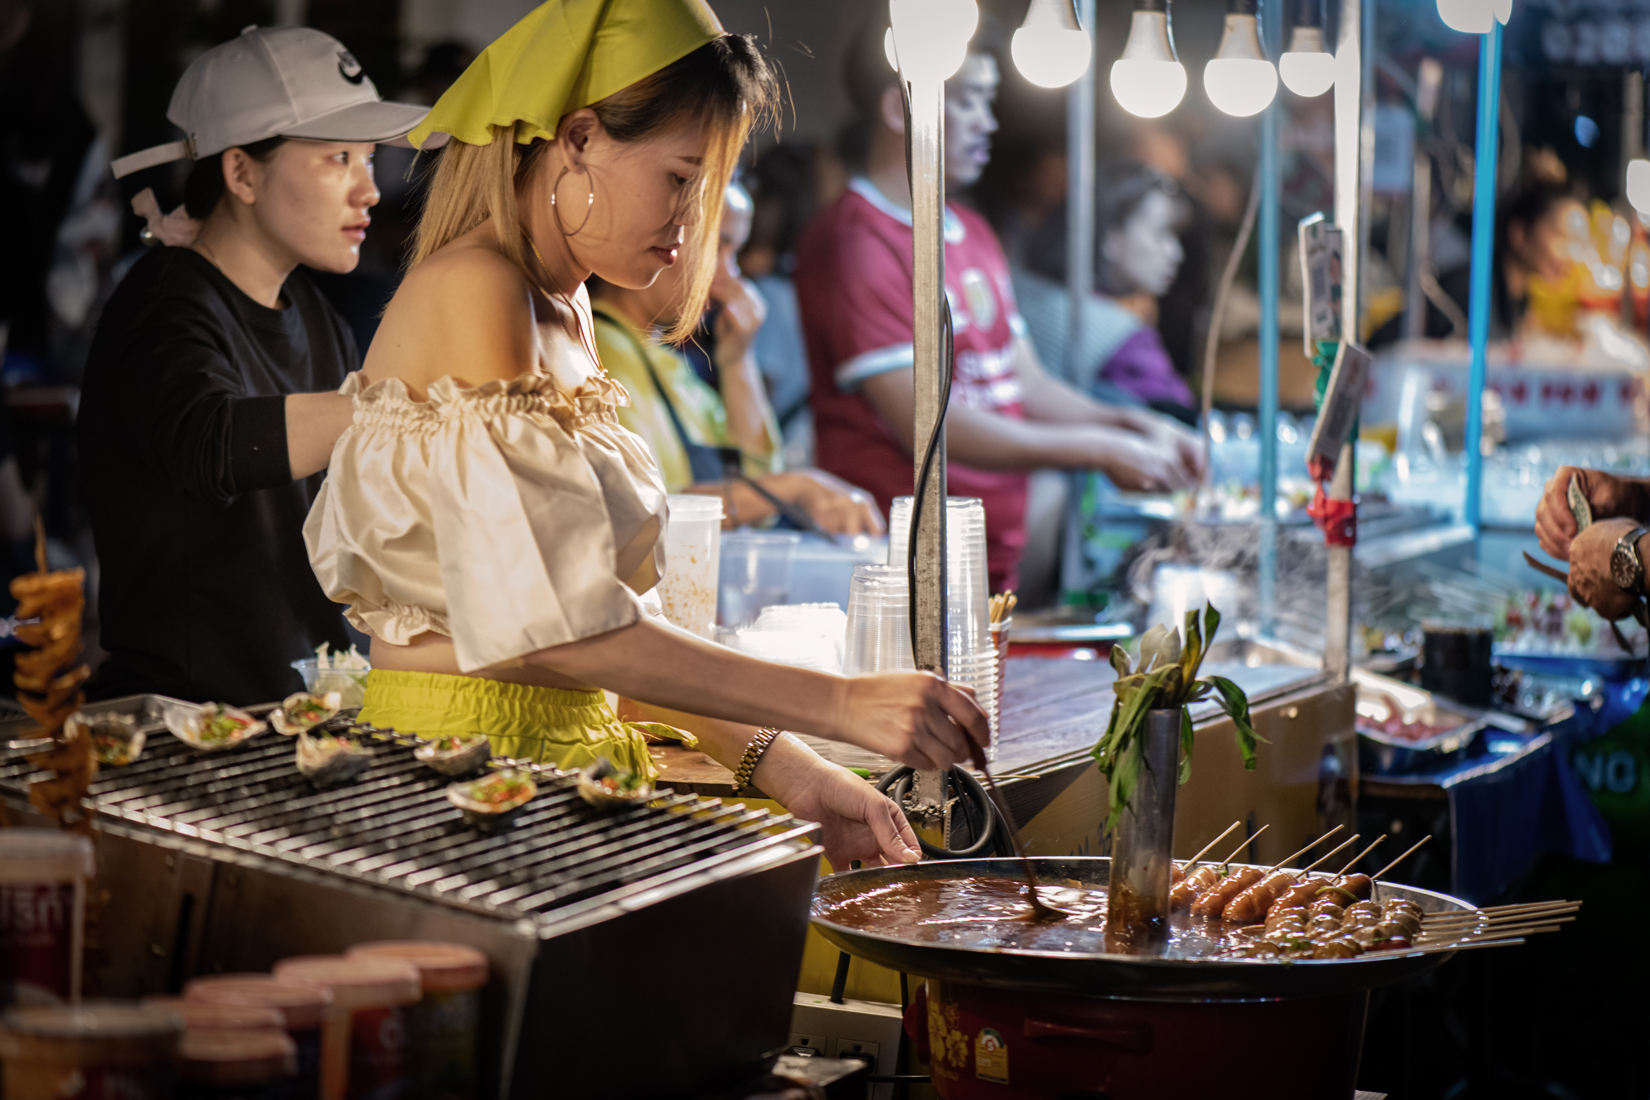 a woman cooking food at a food stand